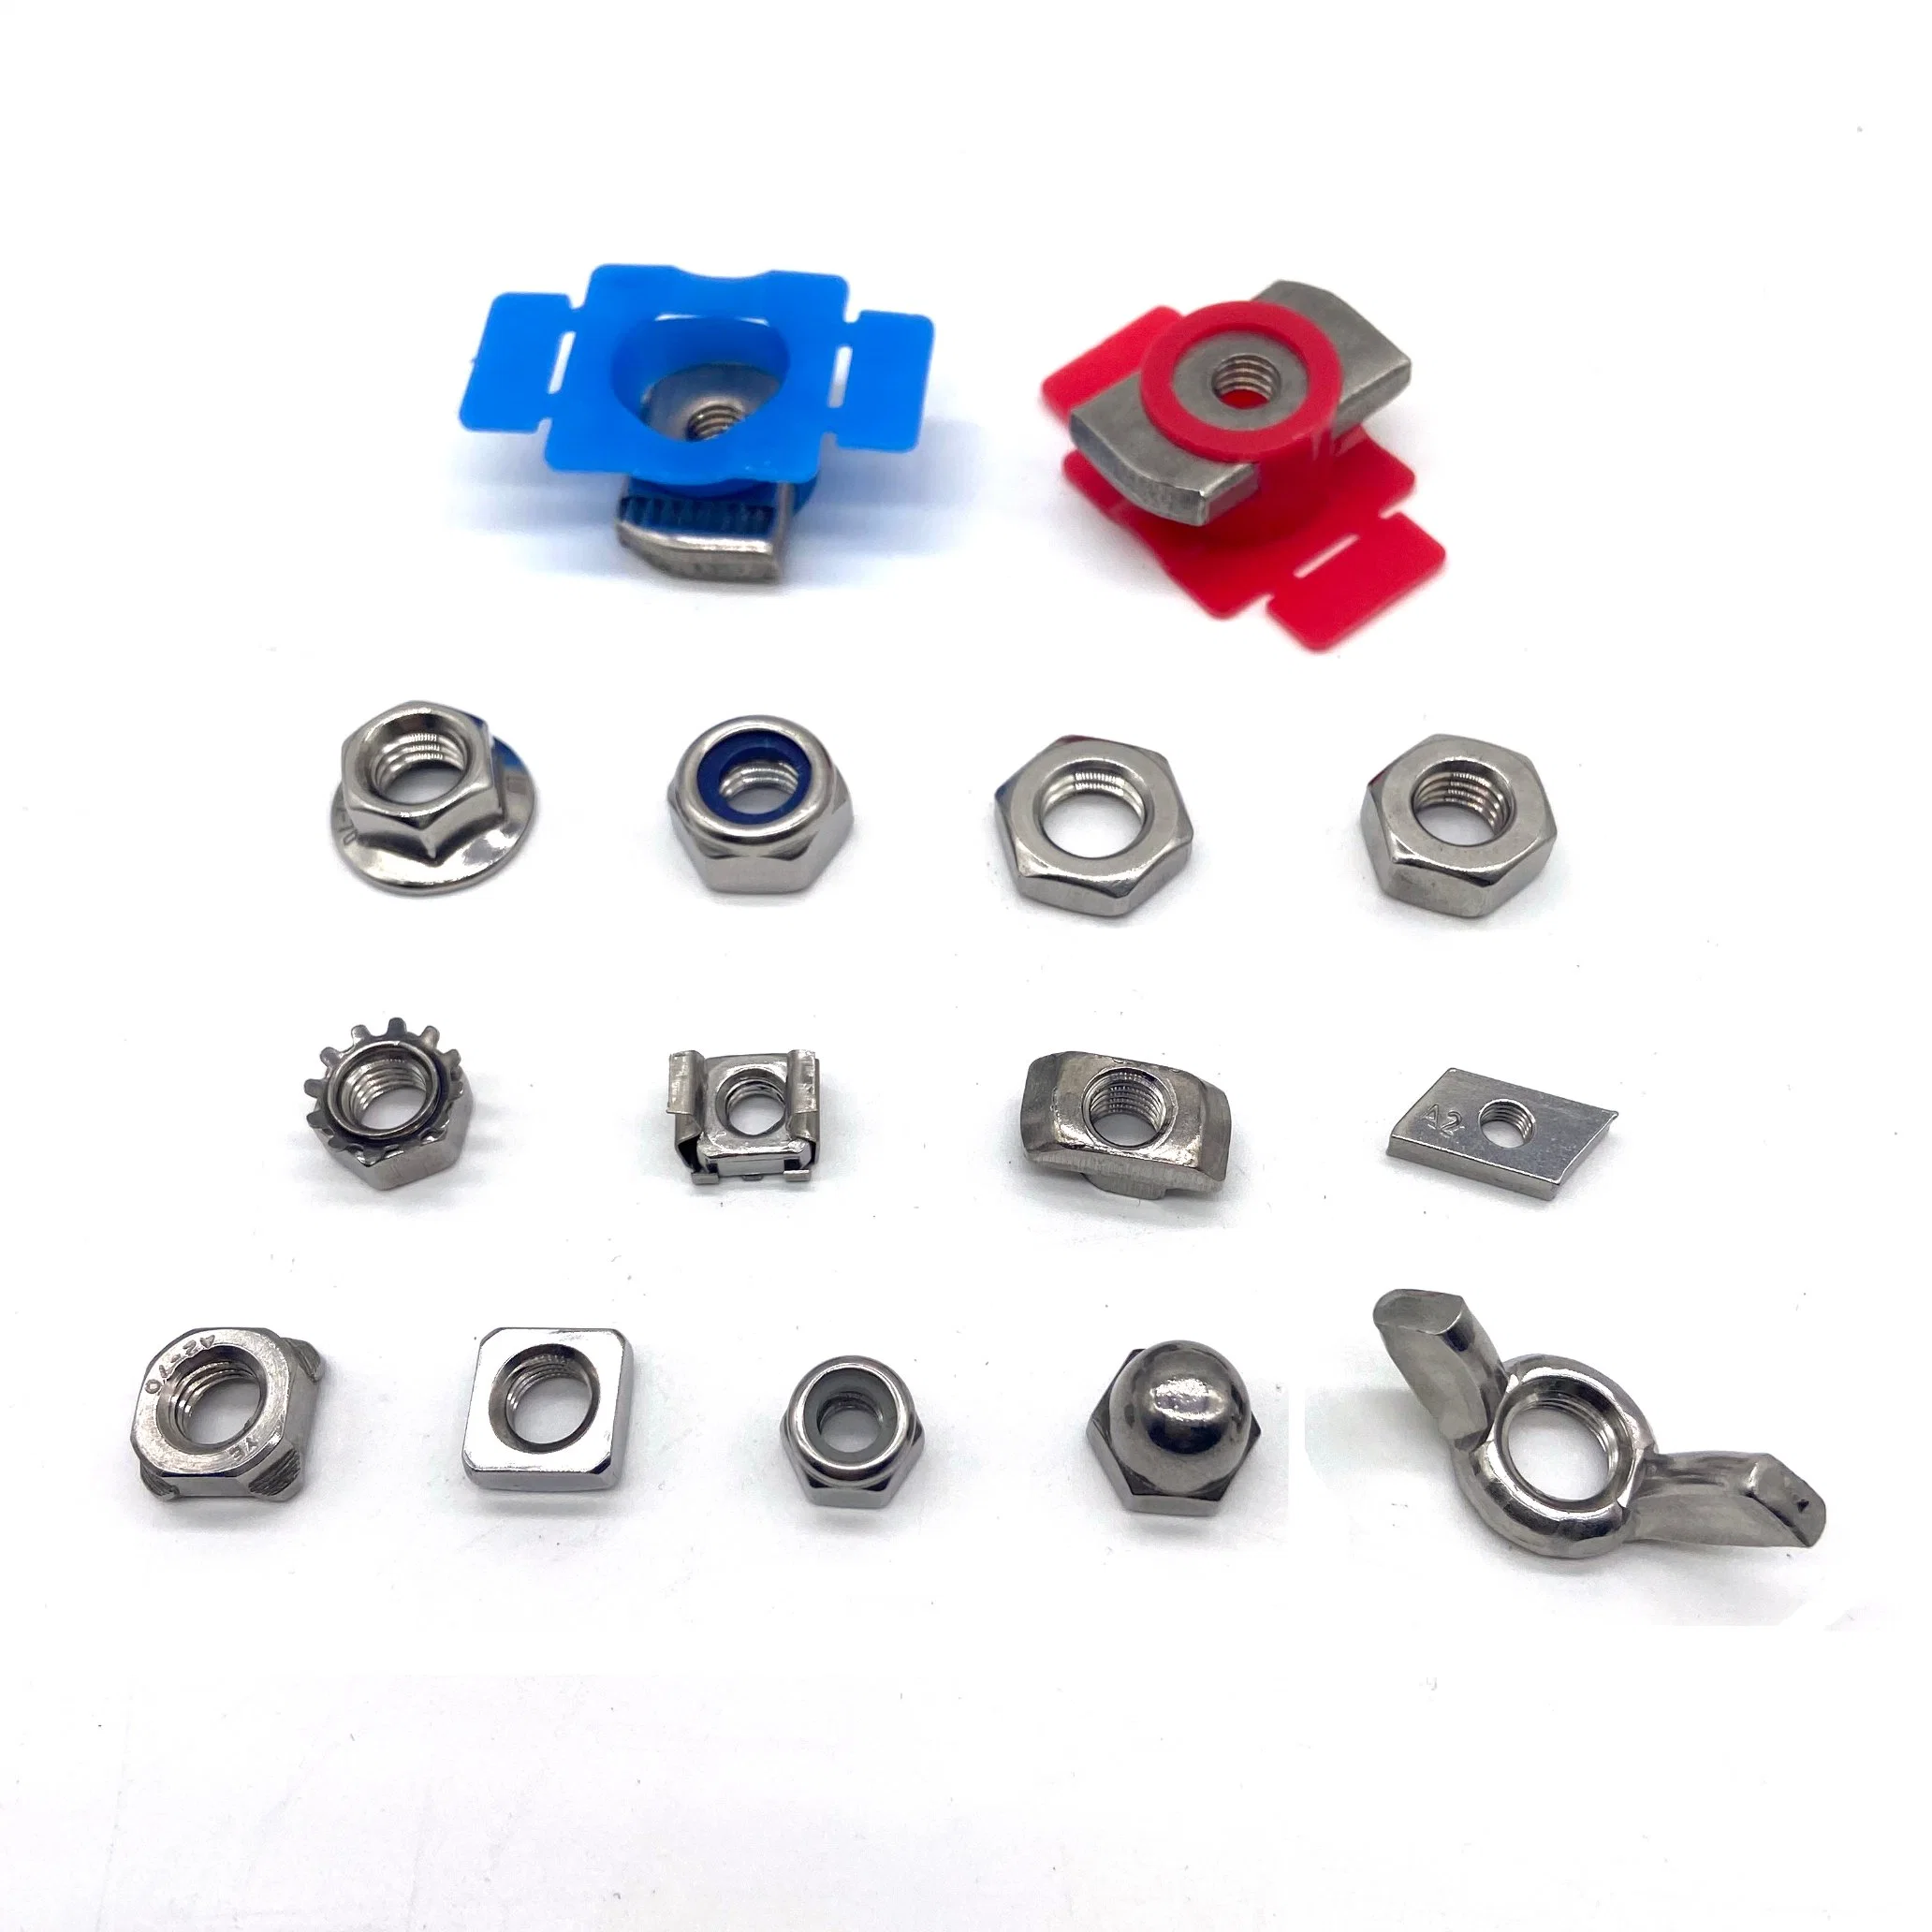 Good in Stock Hex Screw Carriage Bolt / Nut Stainless Steel Fasteners